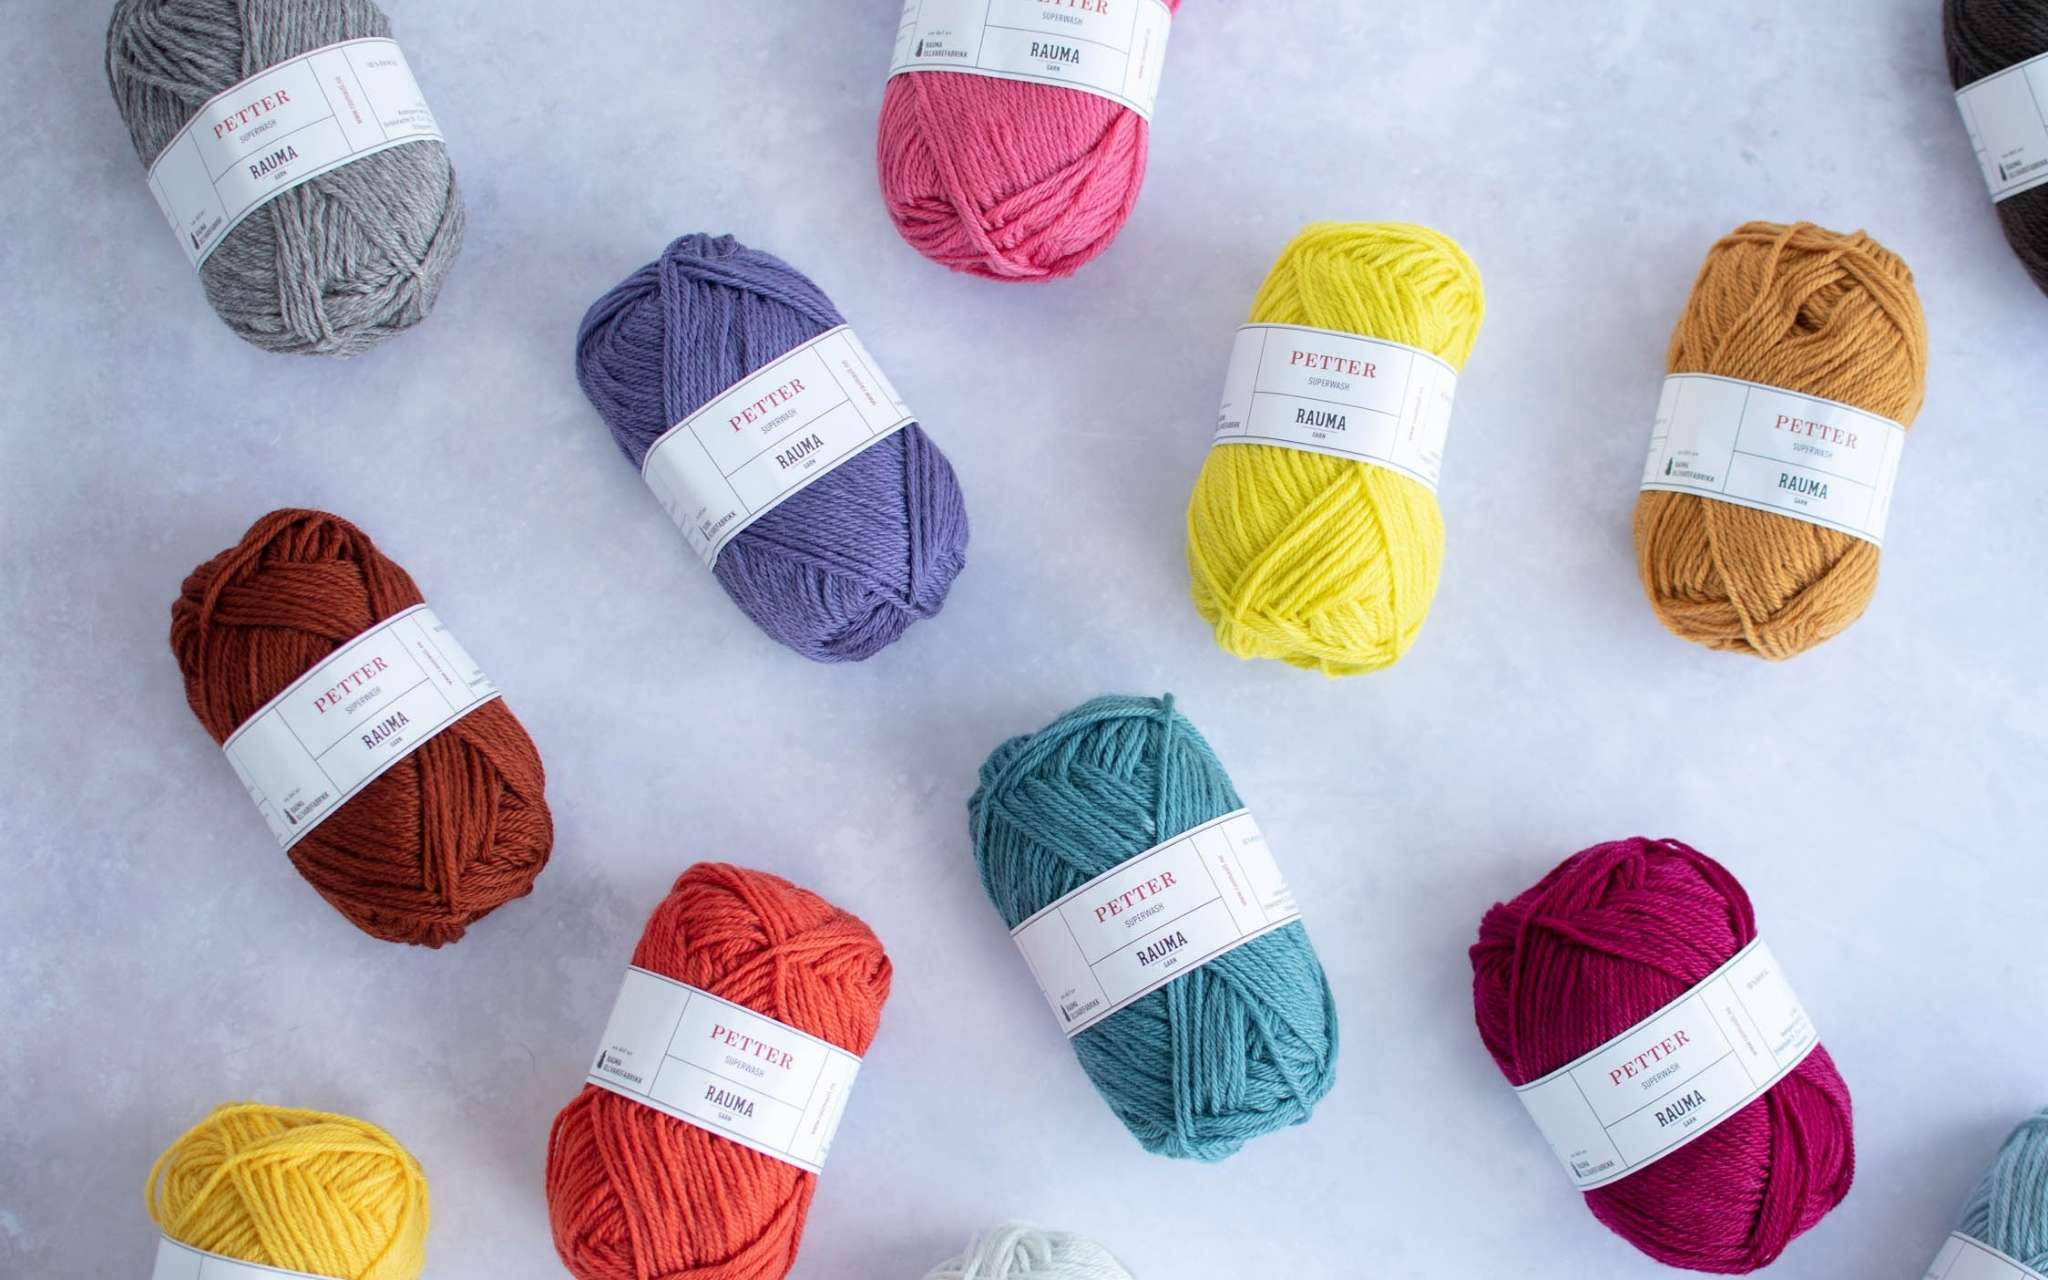 balls of brightly coloured yarn lie scrattered on a pale grey surface